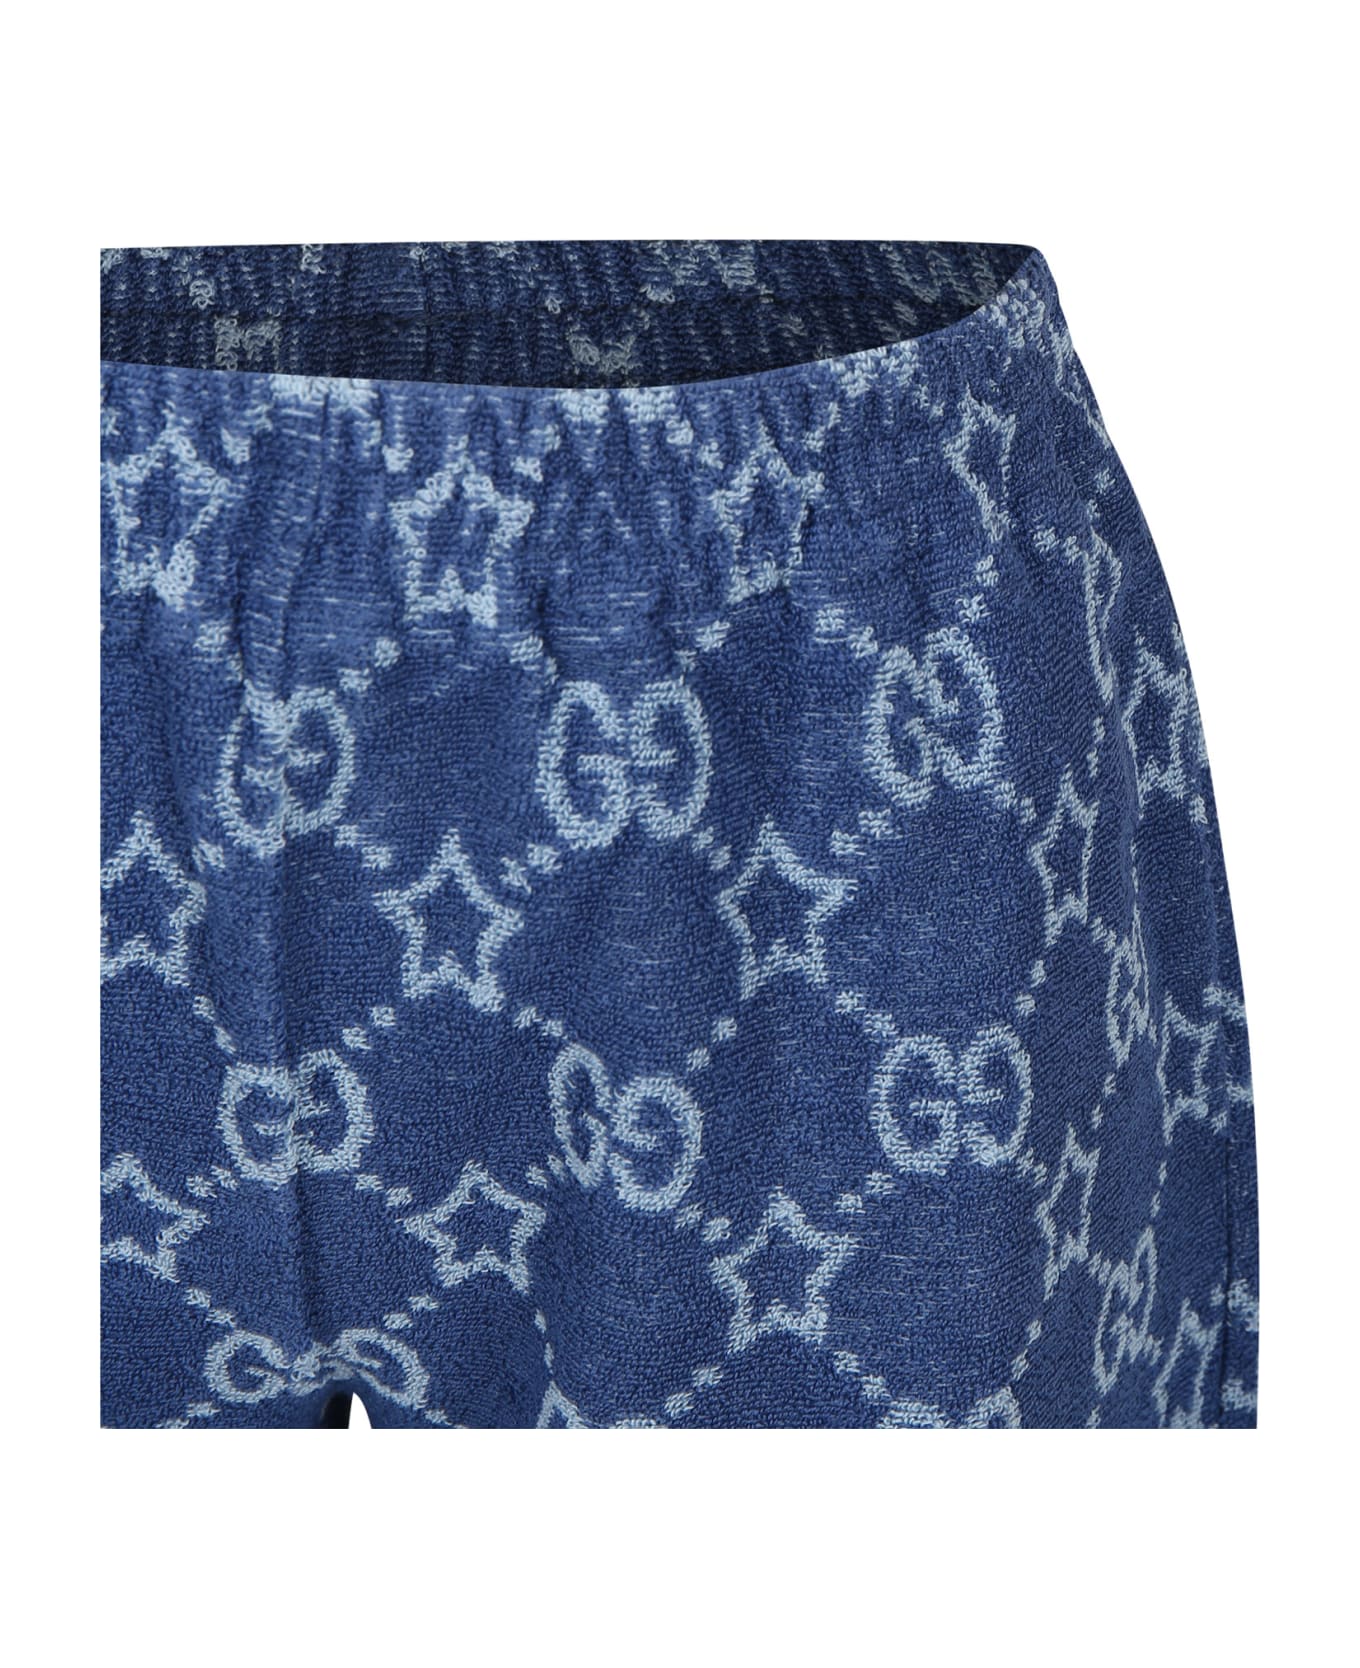 Gucci Blue Shorts For Boy With Gg Stars - Blue